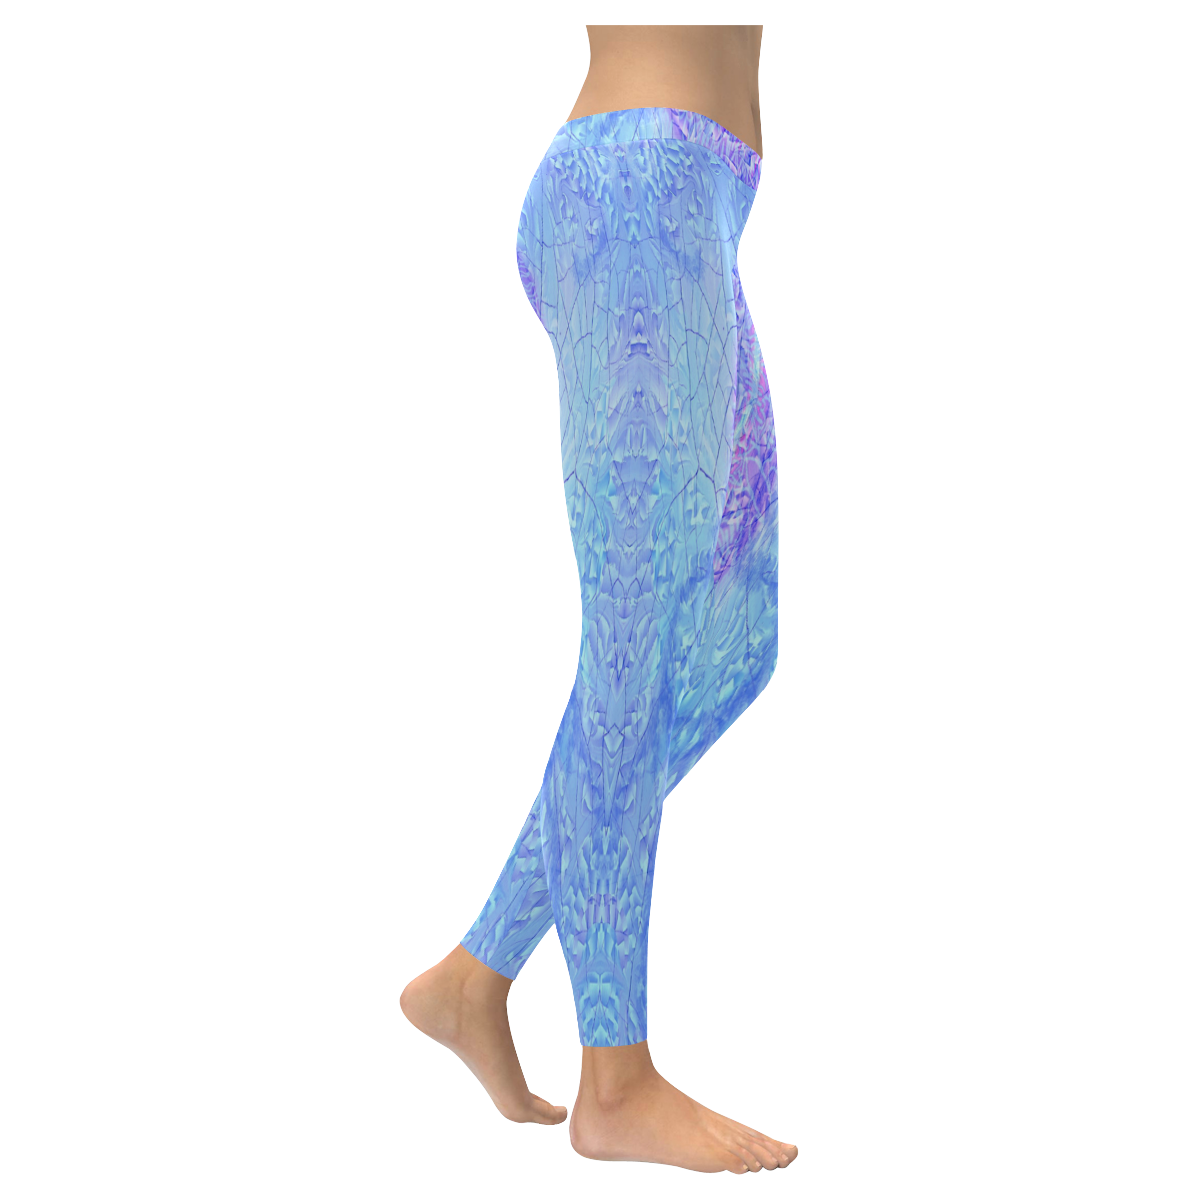 waterfall 3 Women's Low Rise Leggings (Invisible Stitch) (Model L05)